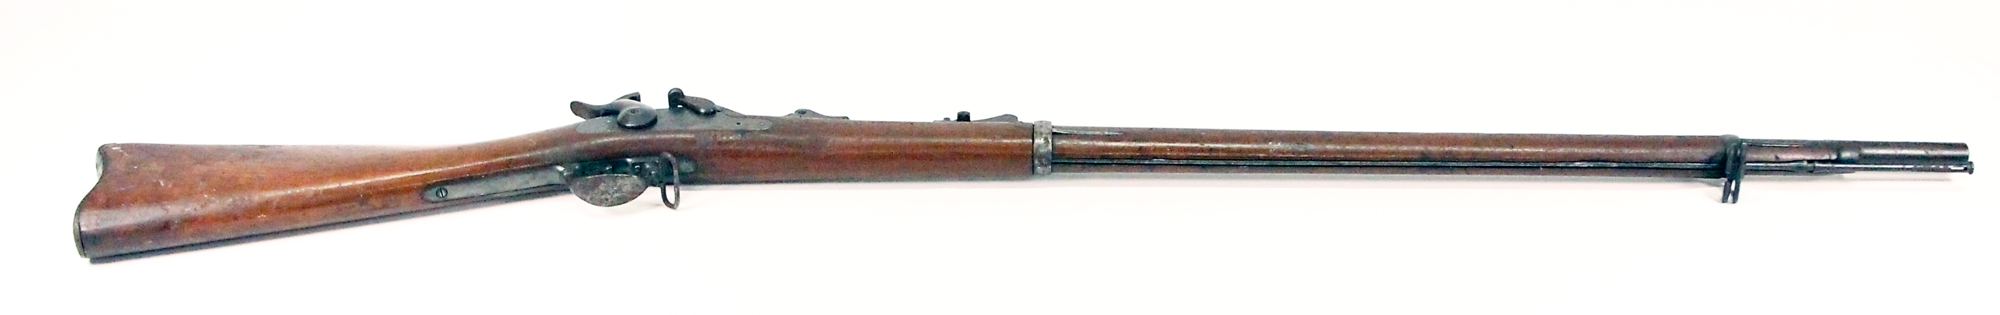 Springfield-Rifle-Page-Image.png